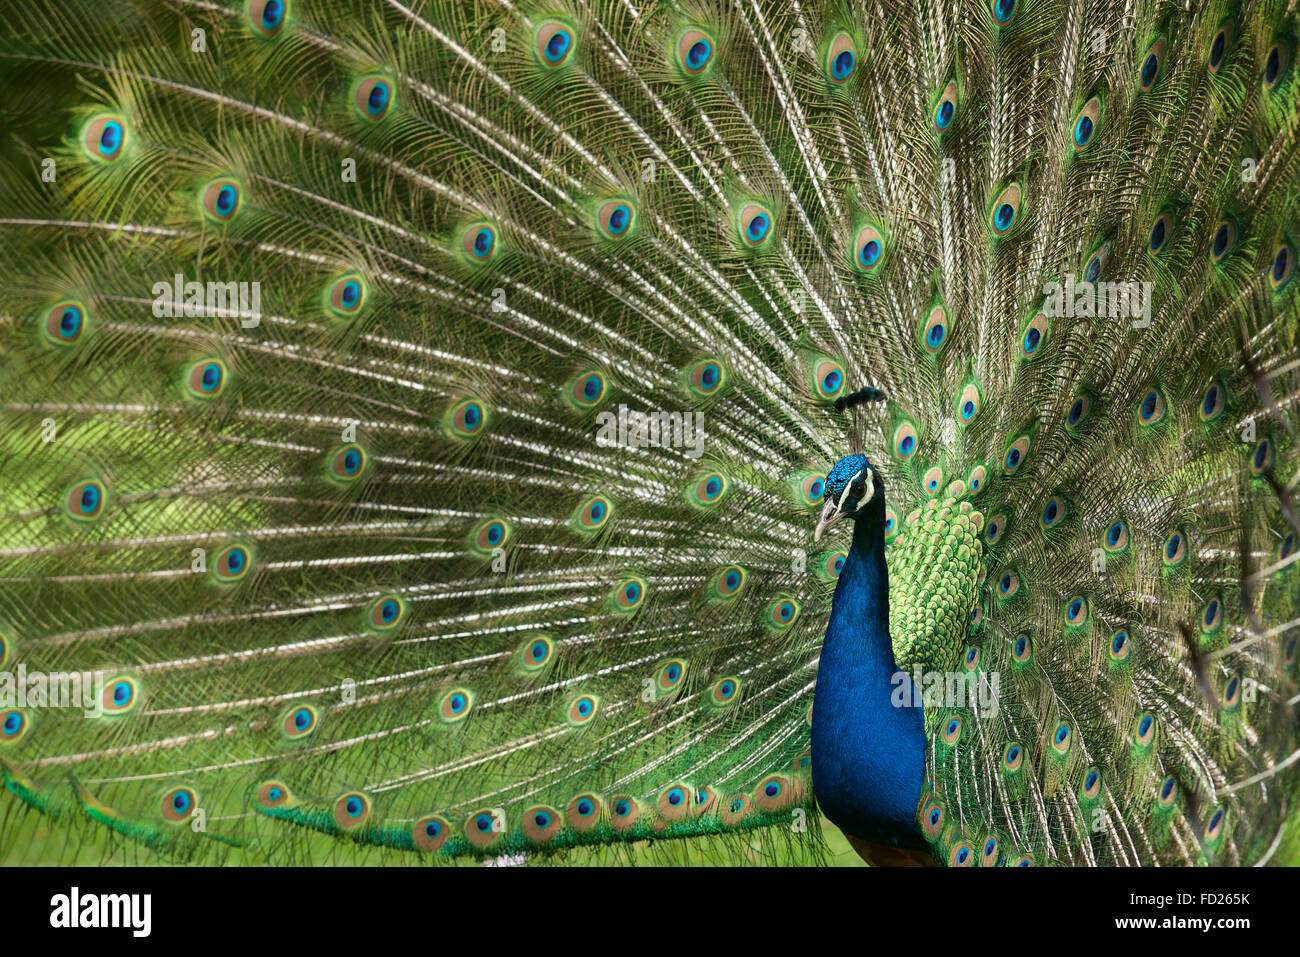 Europe, Germany, peacock, common peafowl (lat. Pavo cristatus) displaying tail, at the Forstbotanischer Garten, an arboretum and Stock Photo